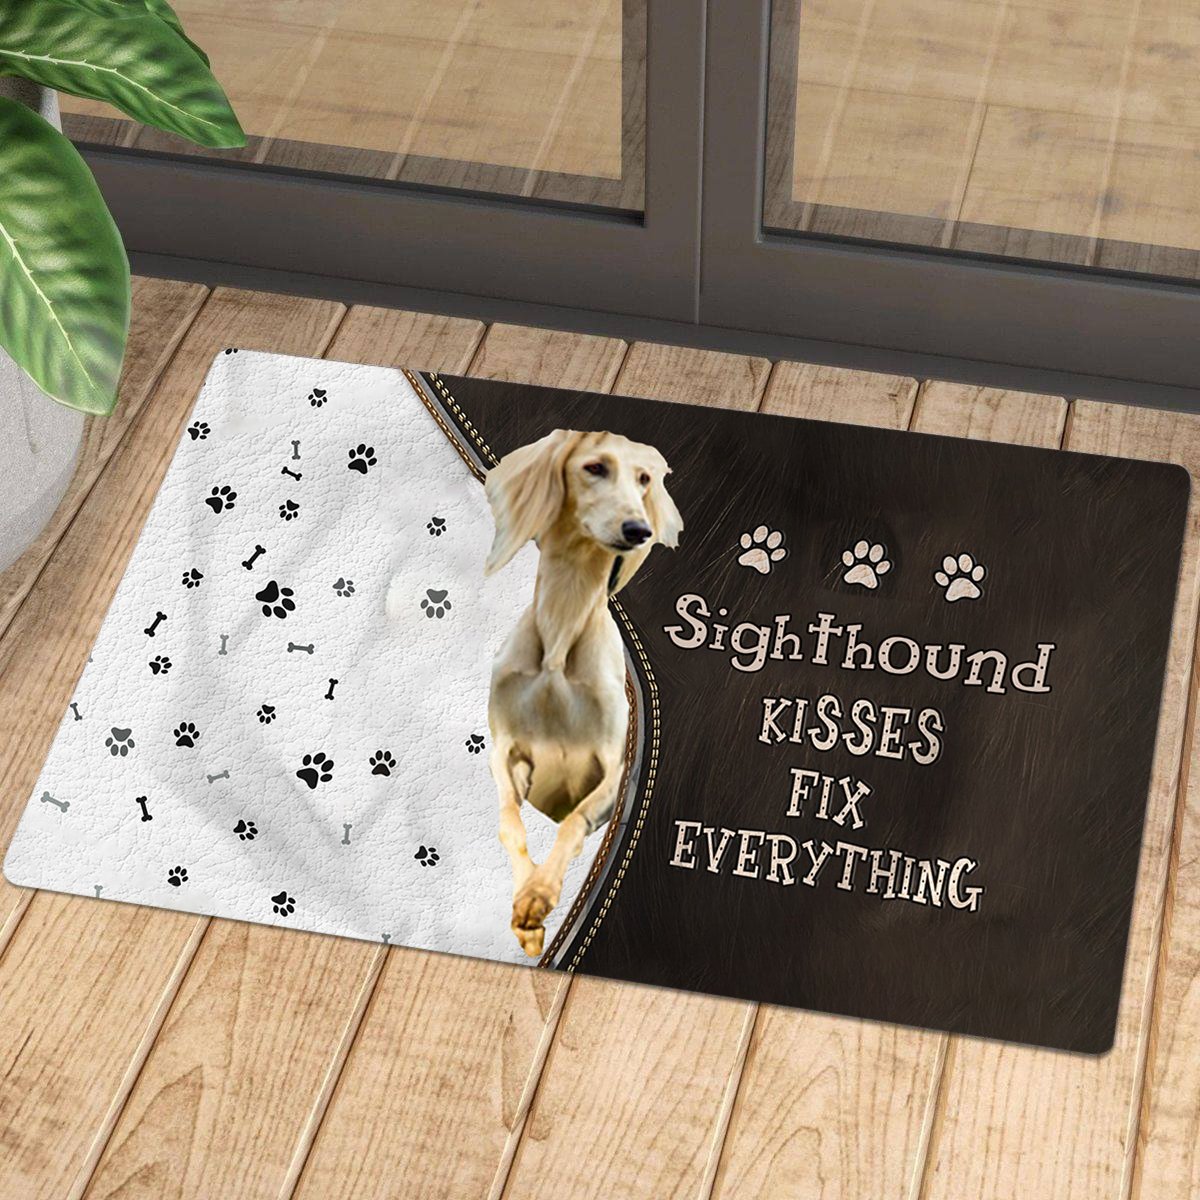 Sighthound Kisses Fix Everything Doormat